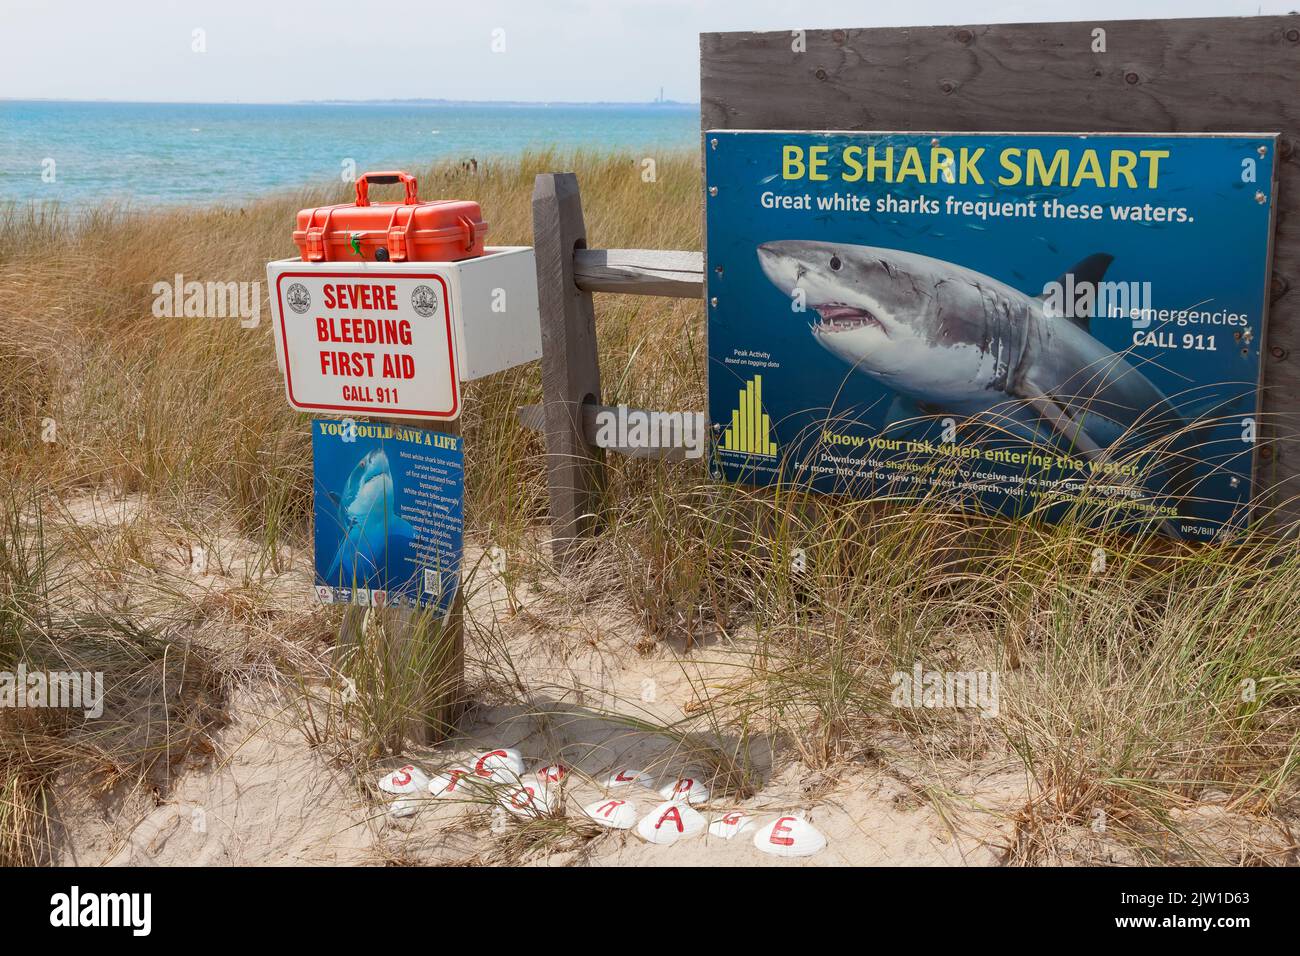 Shark warning sign & first aid kit at Cold Storage Beach, Truro, Barnstable County, Cape Cod, Massachusetts, United States. Stock Photo